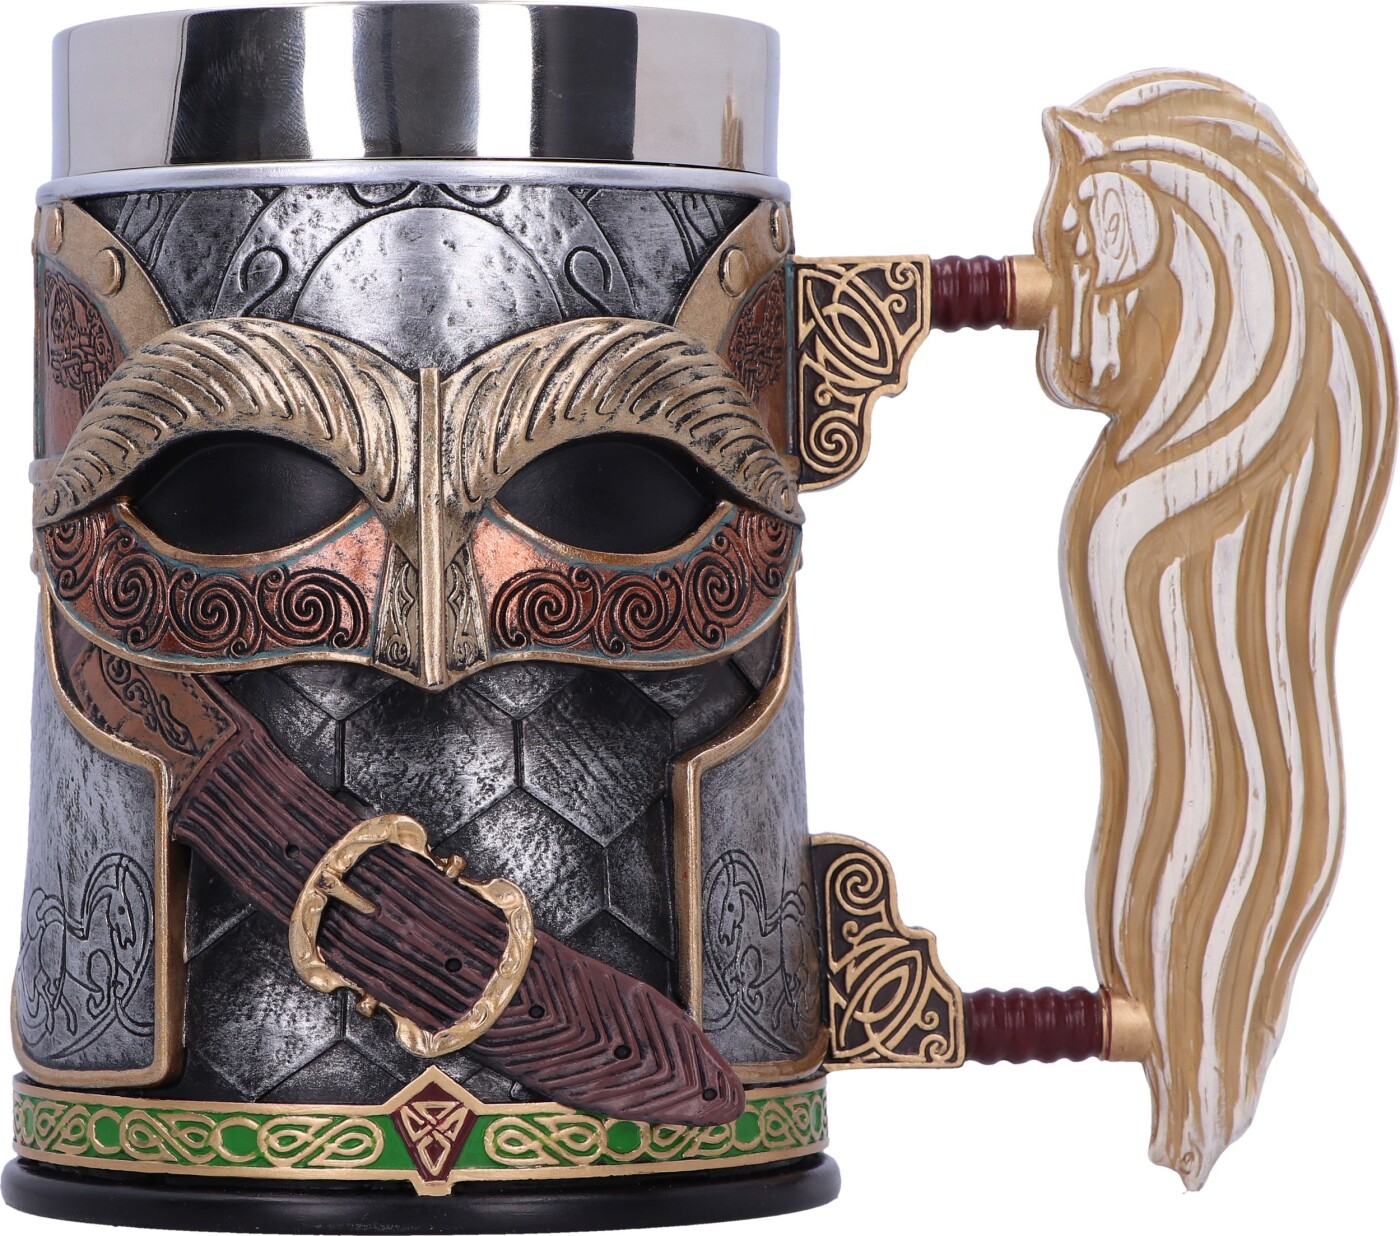 Se Lord Of The Rings Rohan Tankard 15.5cm hos Gucca.dk